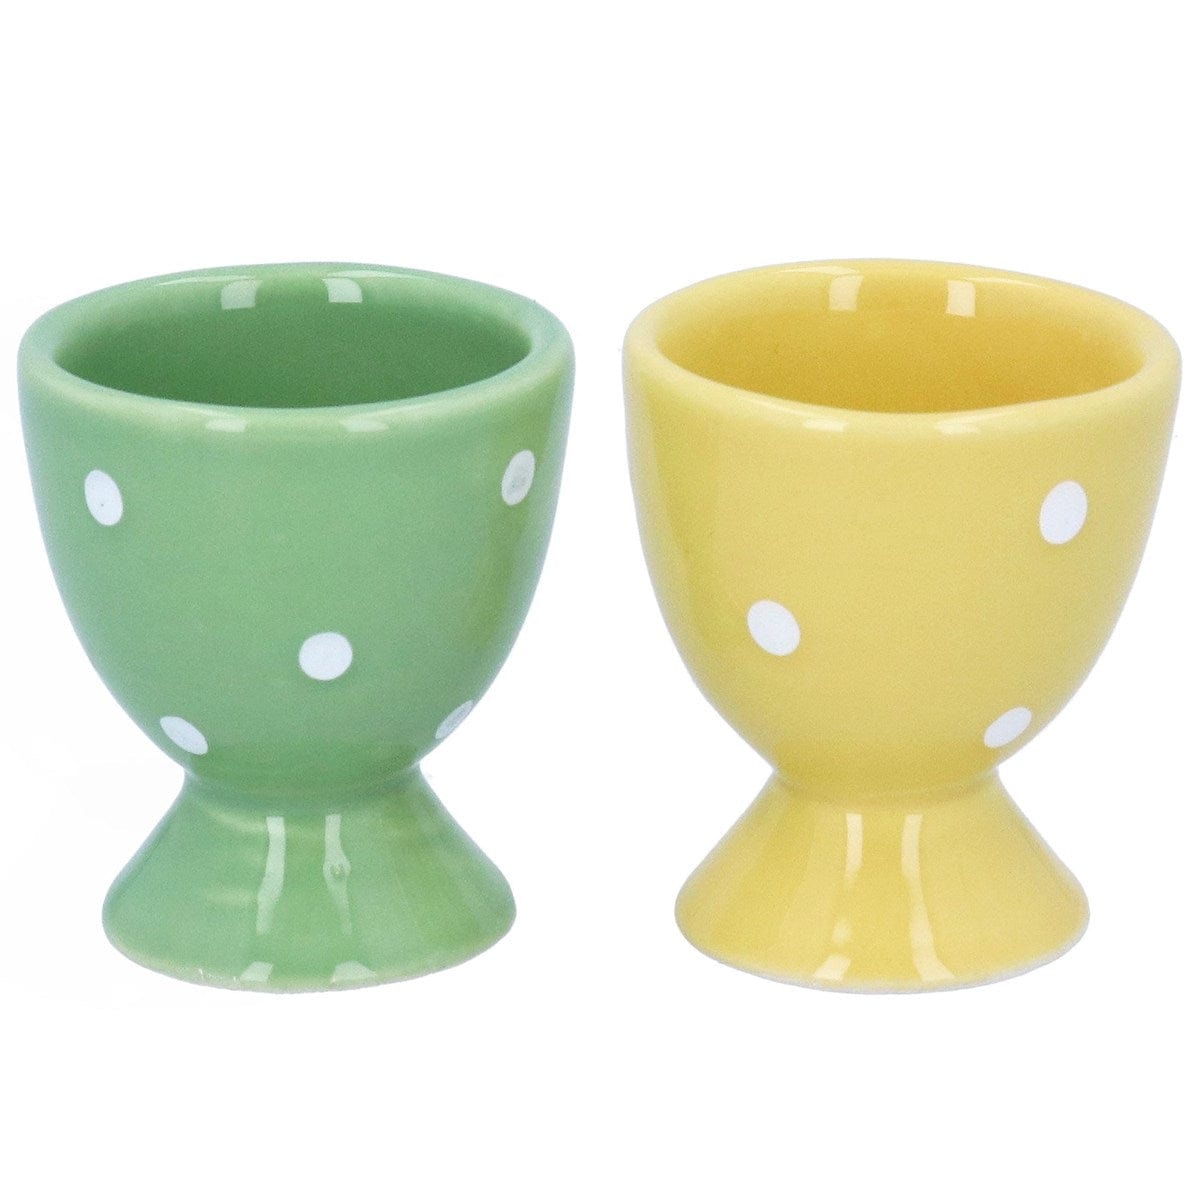 Gisela Graham Easter Kitchen Accessories Set of Two Spotty Yellow and Green Egg Cups